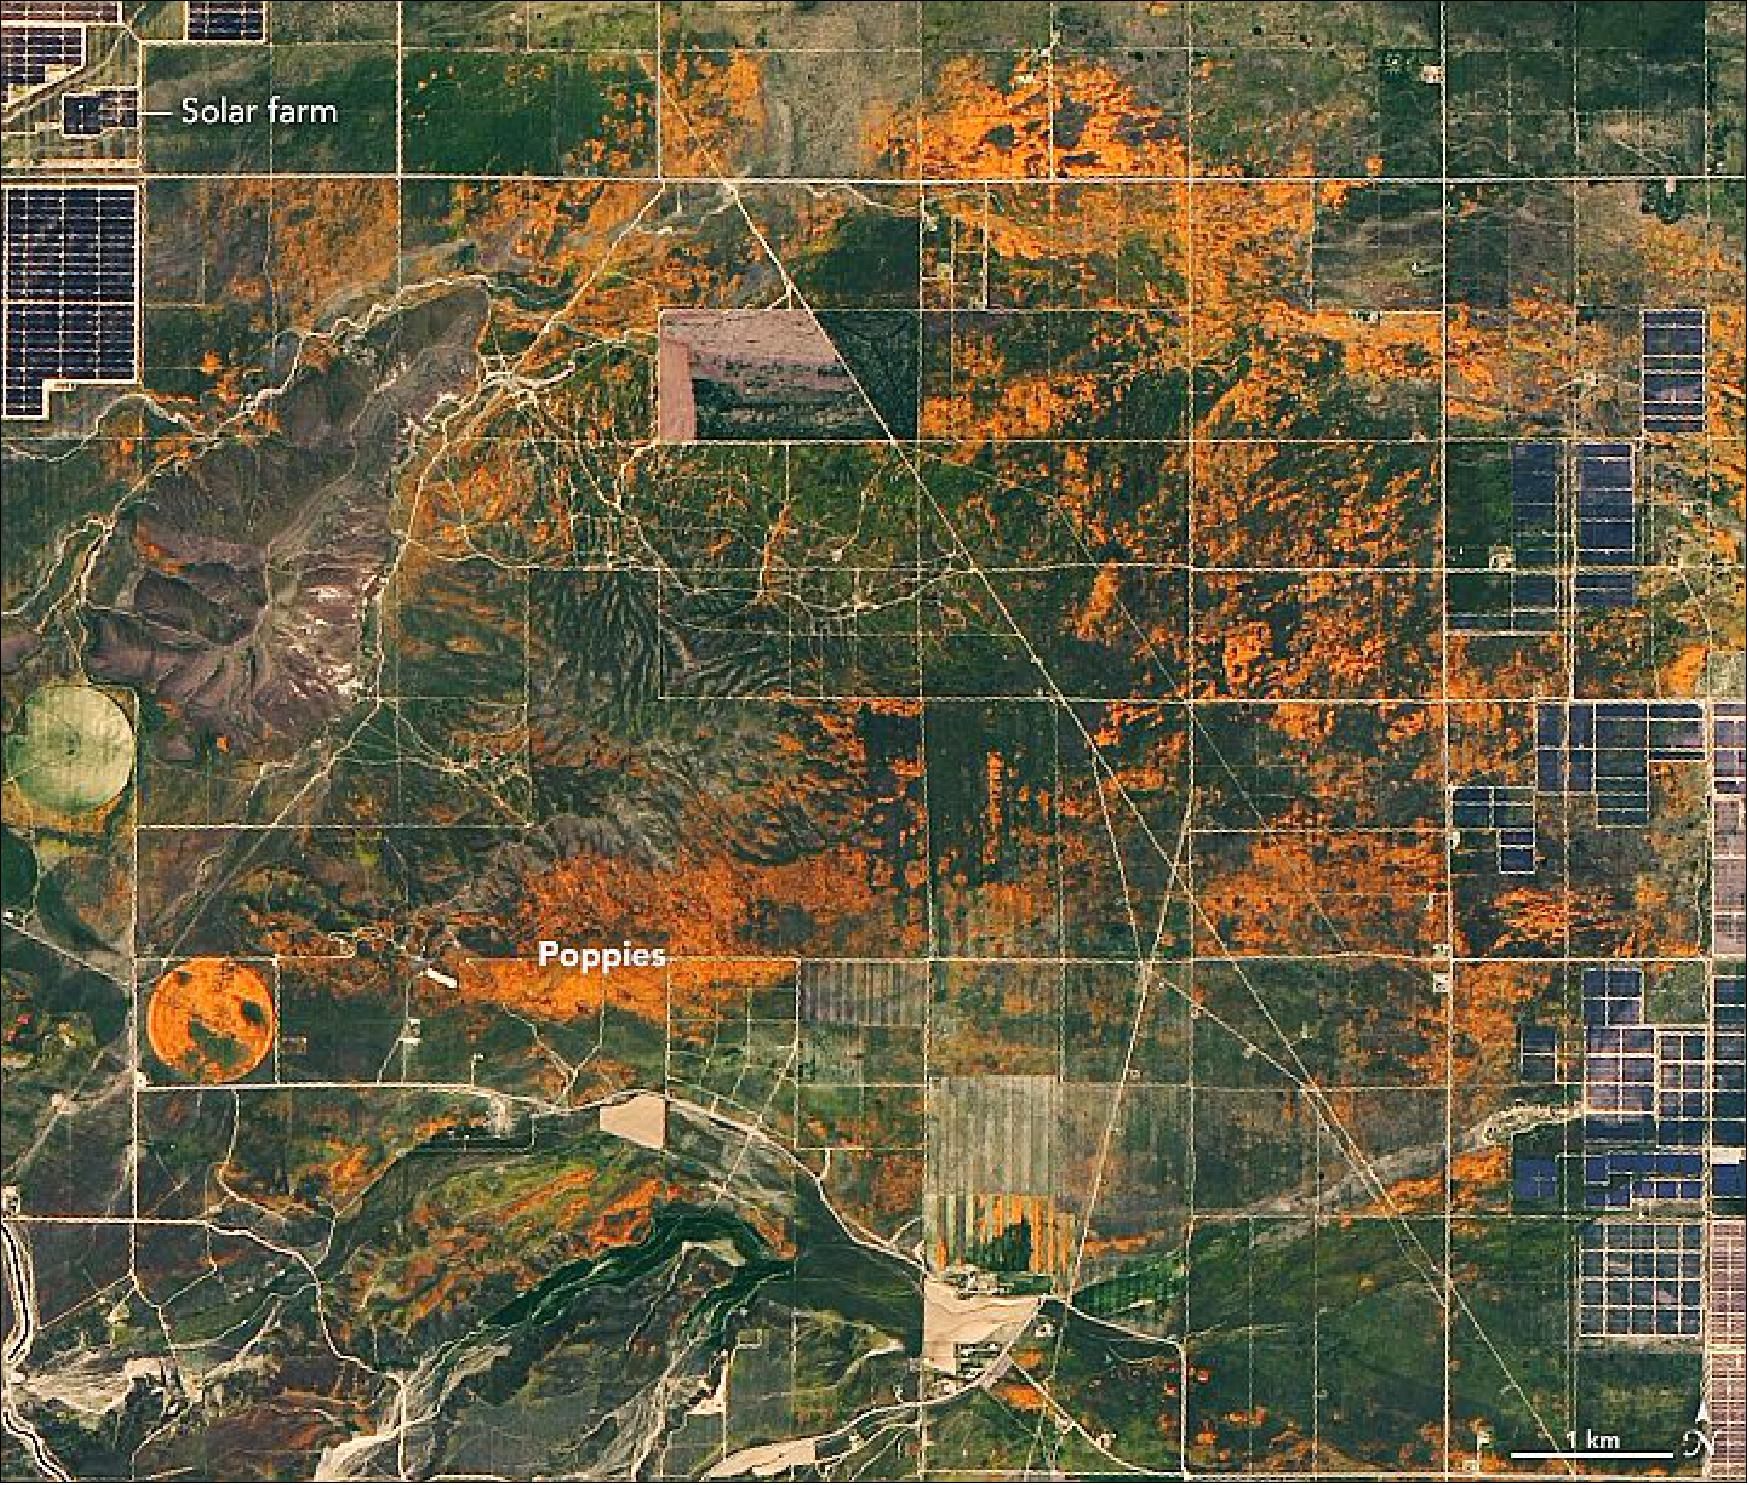 Figure 95: After a wet March and April 2020, poppy fields bloomed in Southern California. On April 14, 2020, the Operational Land Imager (OLI) on the Landsat 8 satellite acquired these images of vast blooms in the Antelope Valley California Poppy Reserve. These images were acquired when poppy flowers in the valley were thought to be at or near their peak (image credit: NASA Earth Observatory, images by Lauren Dauphin, using Landsat data from the U.S. Geological Survey. Story by Kasha Patel)